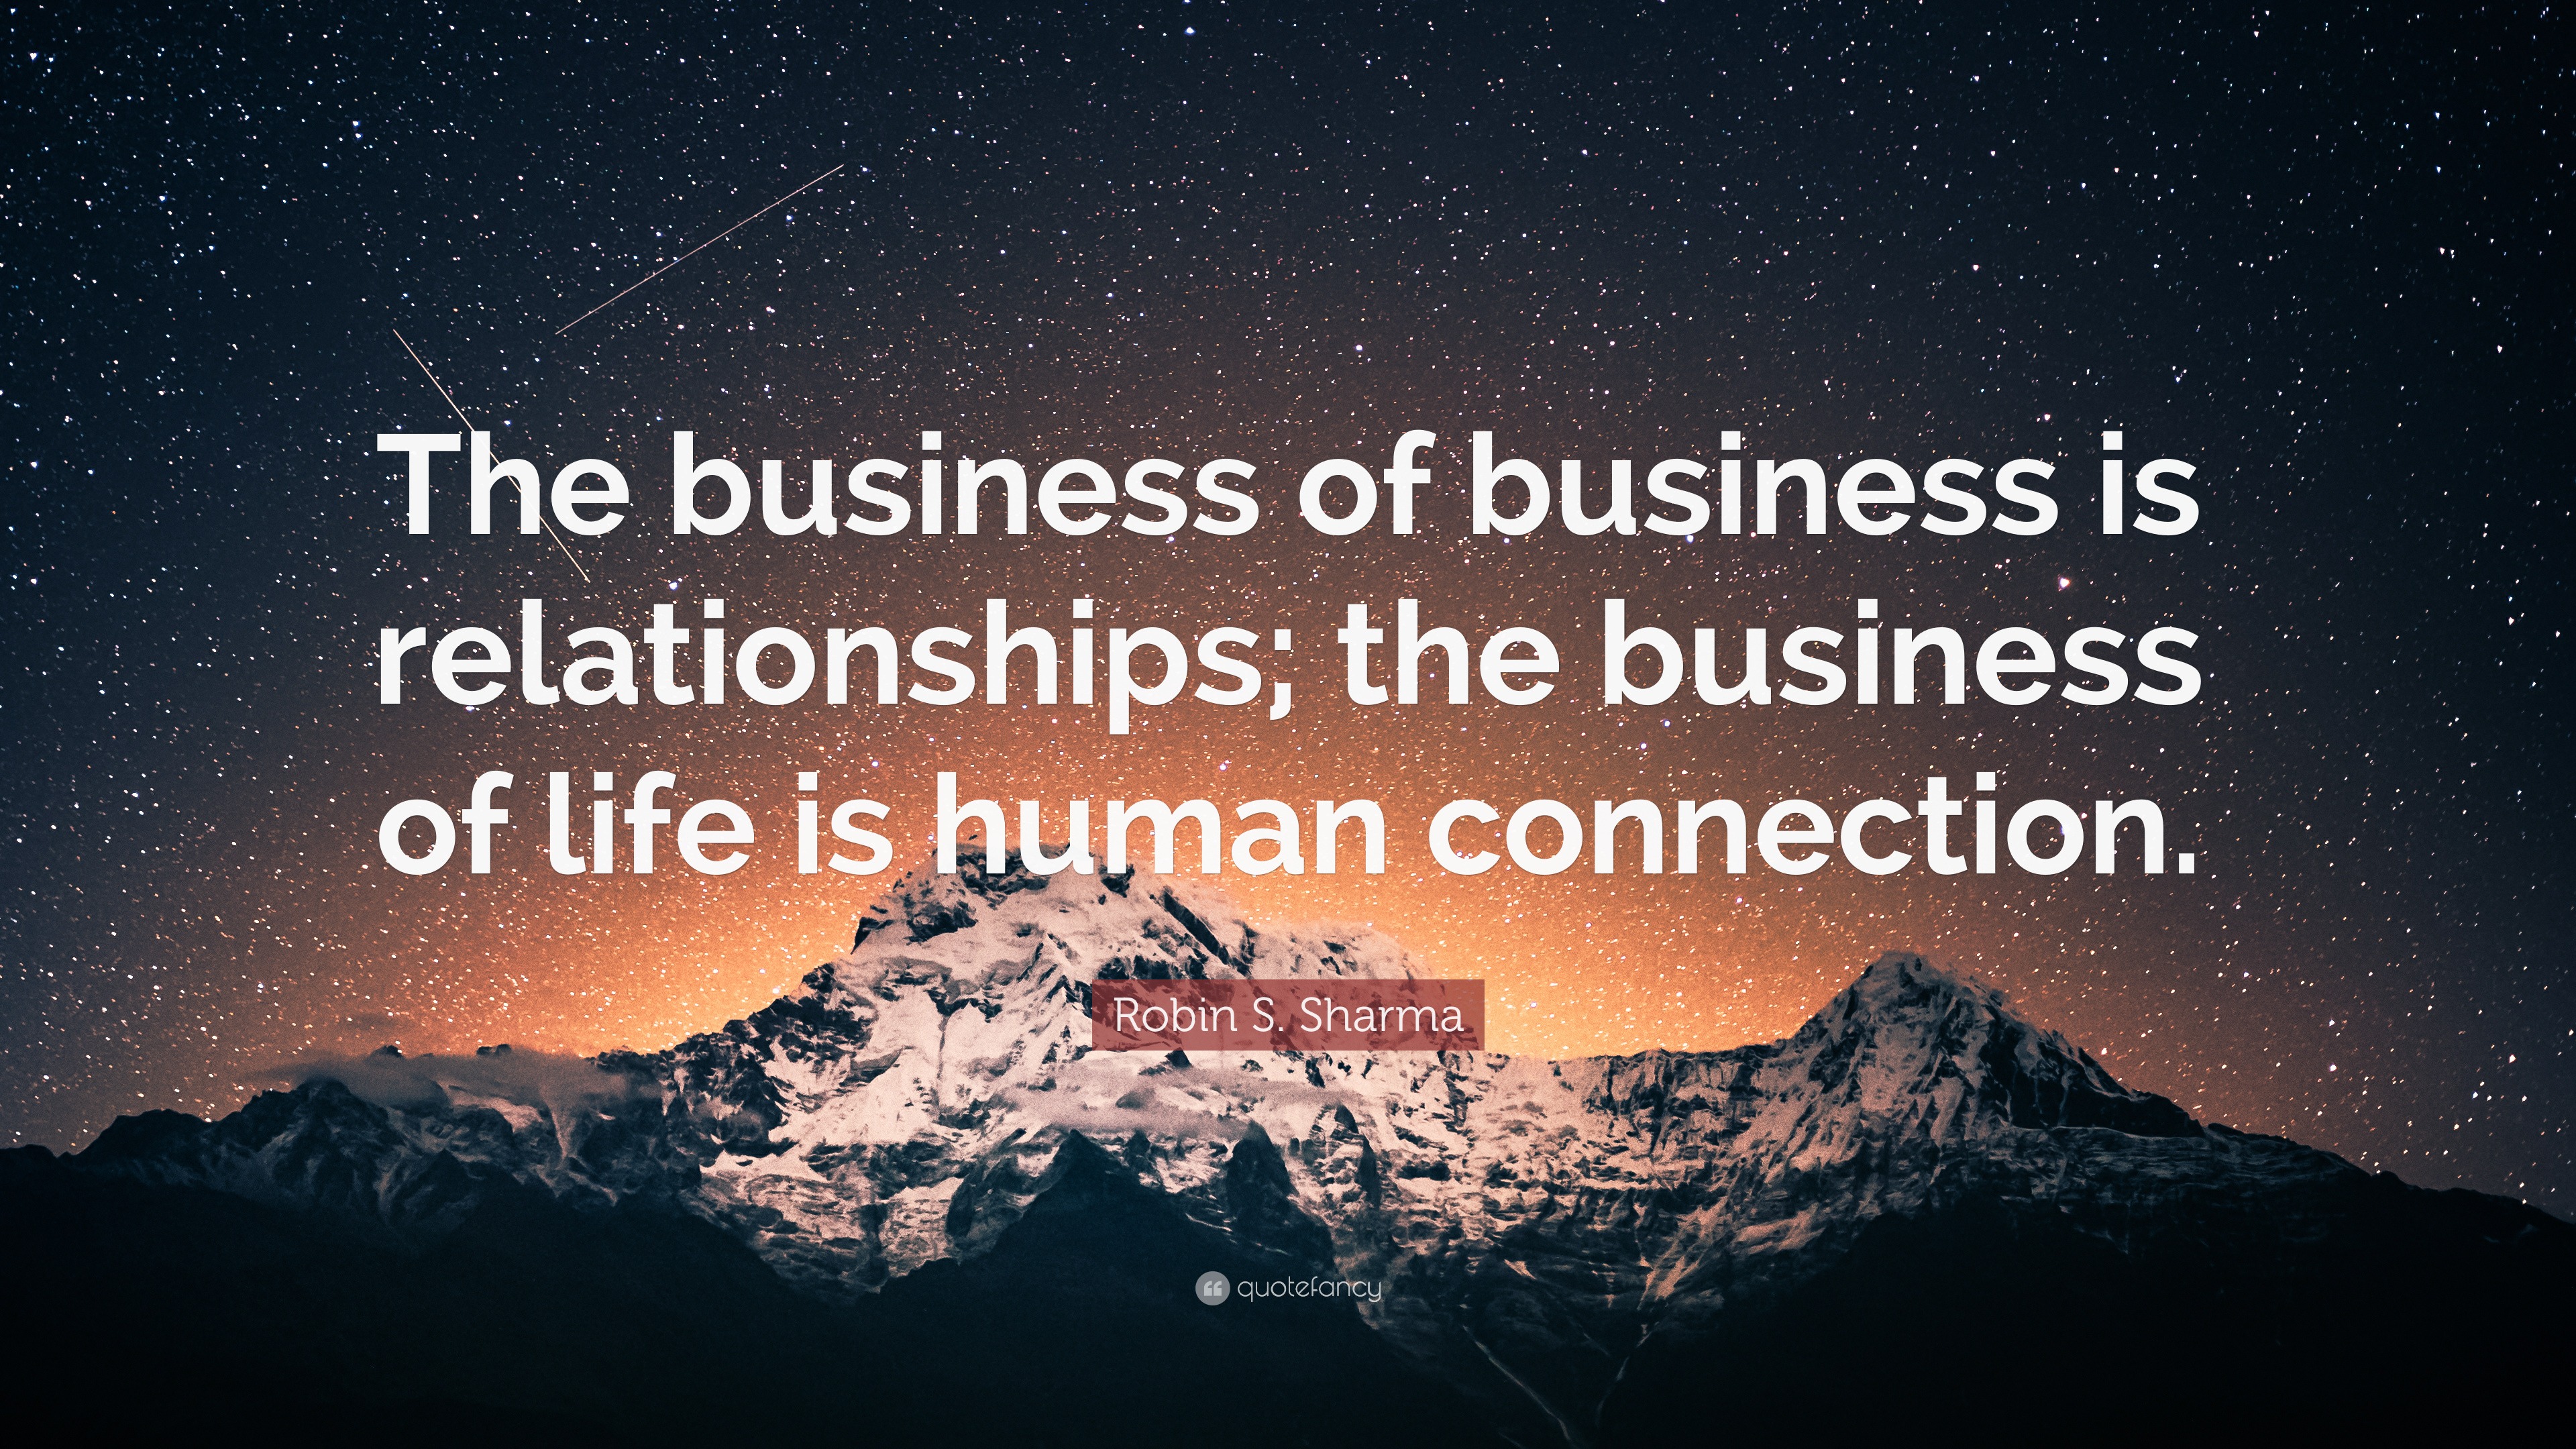 Robin S. Sharma Quote: “The business of business is relationships; the